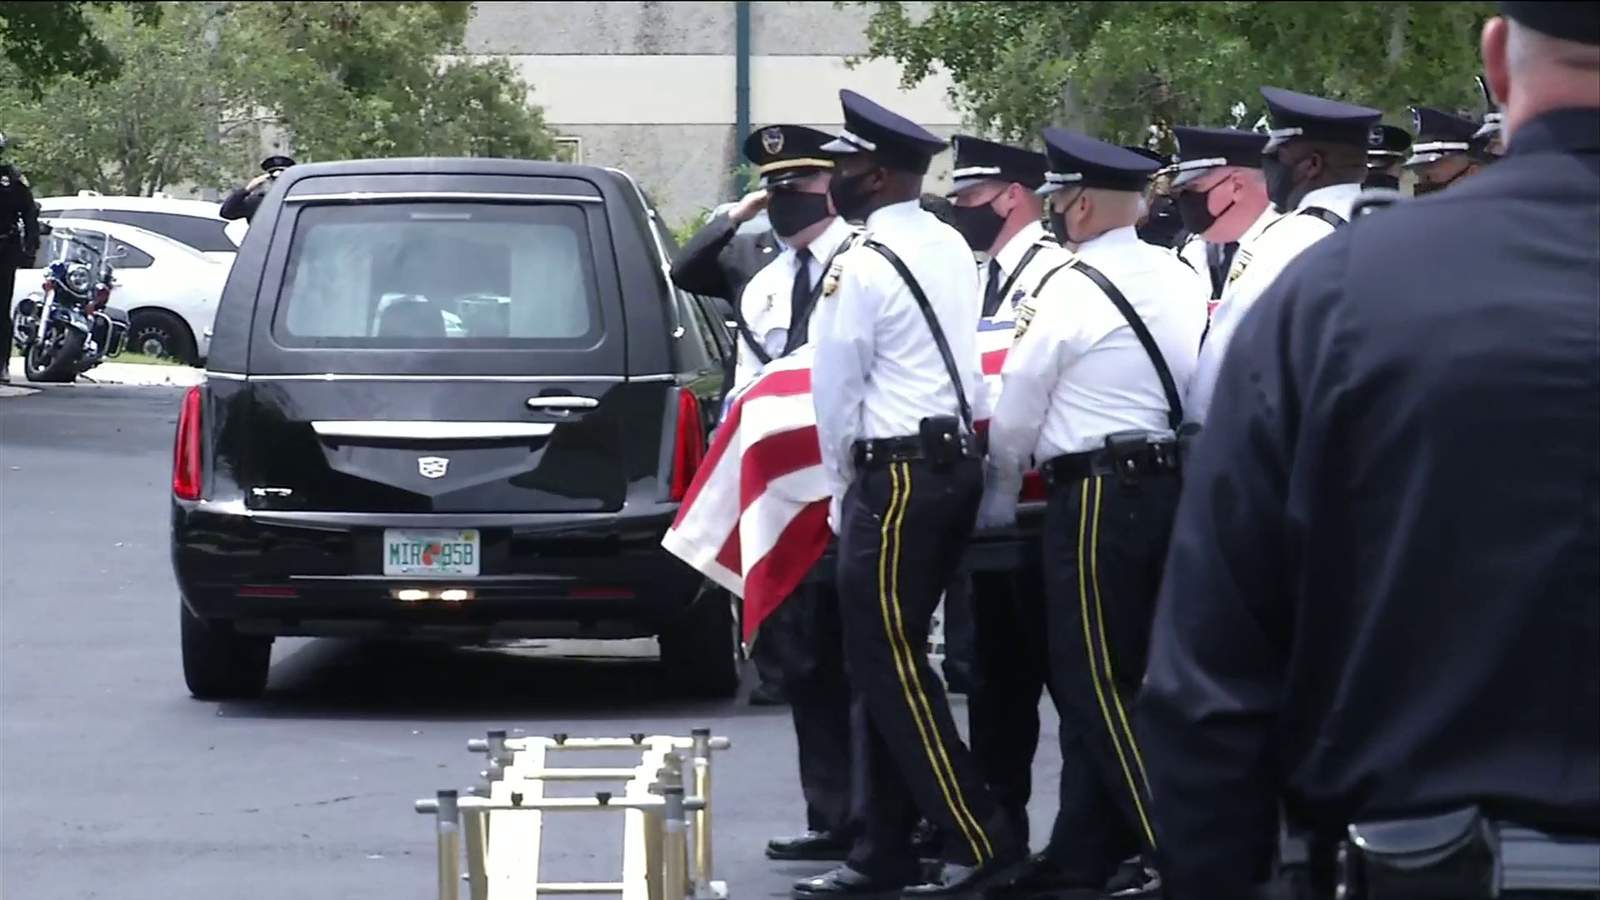 Veteran police lieutenant who died with COVID-19 honored at service